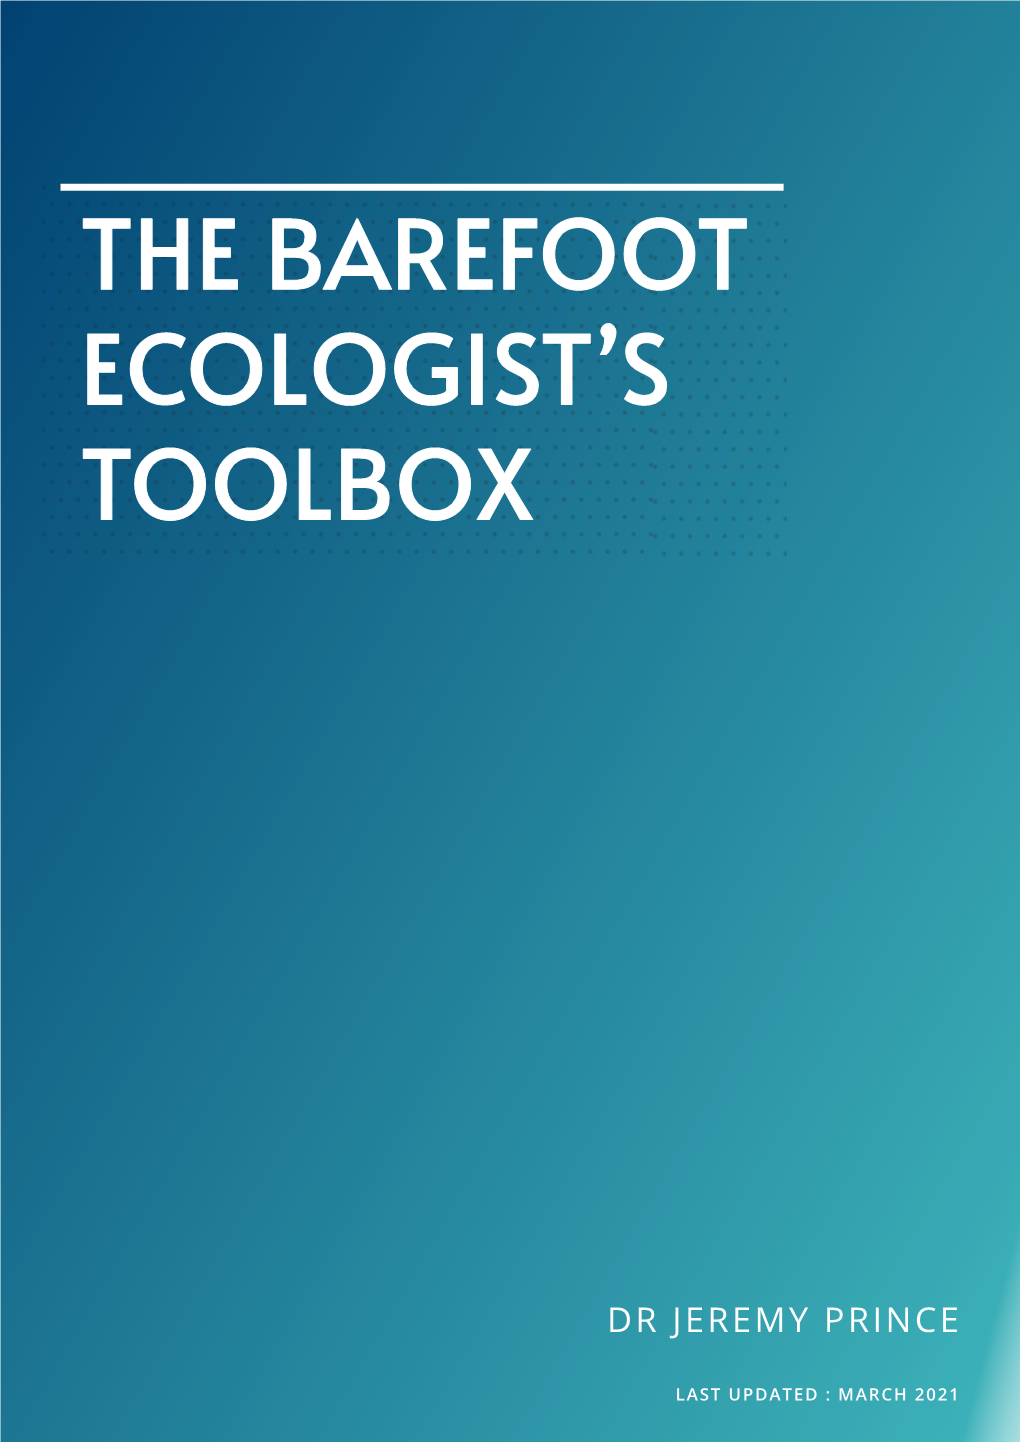 The Barefoot Ecologist's Toolbox